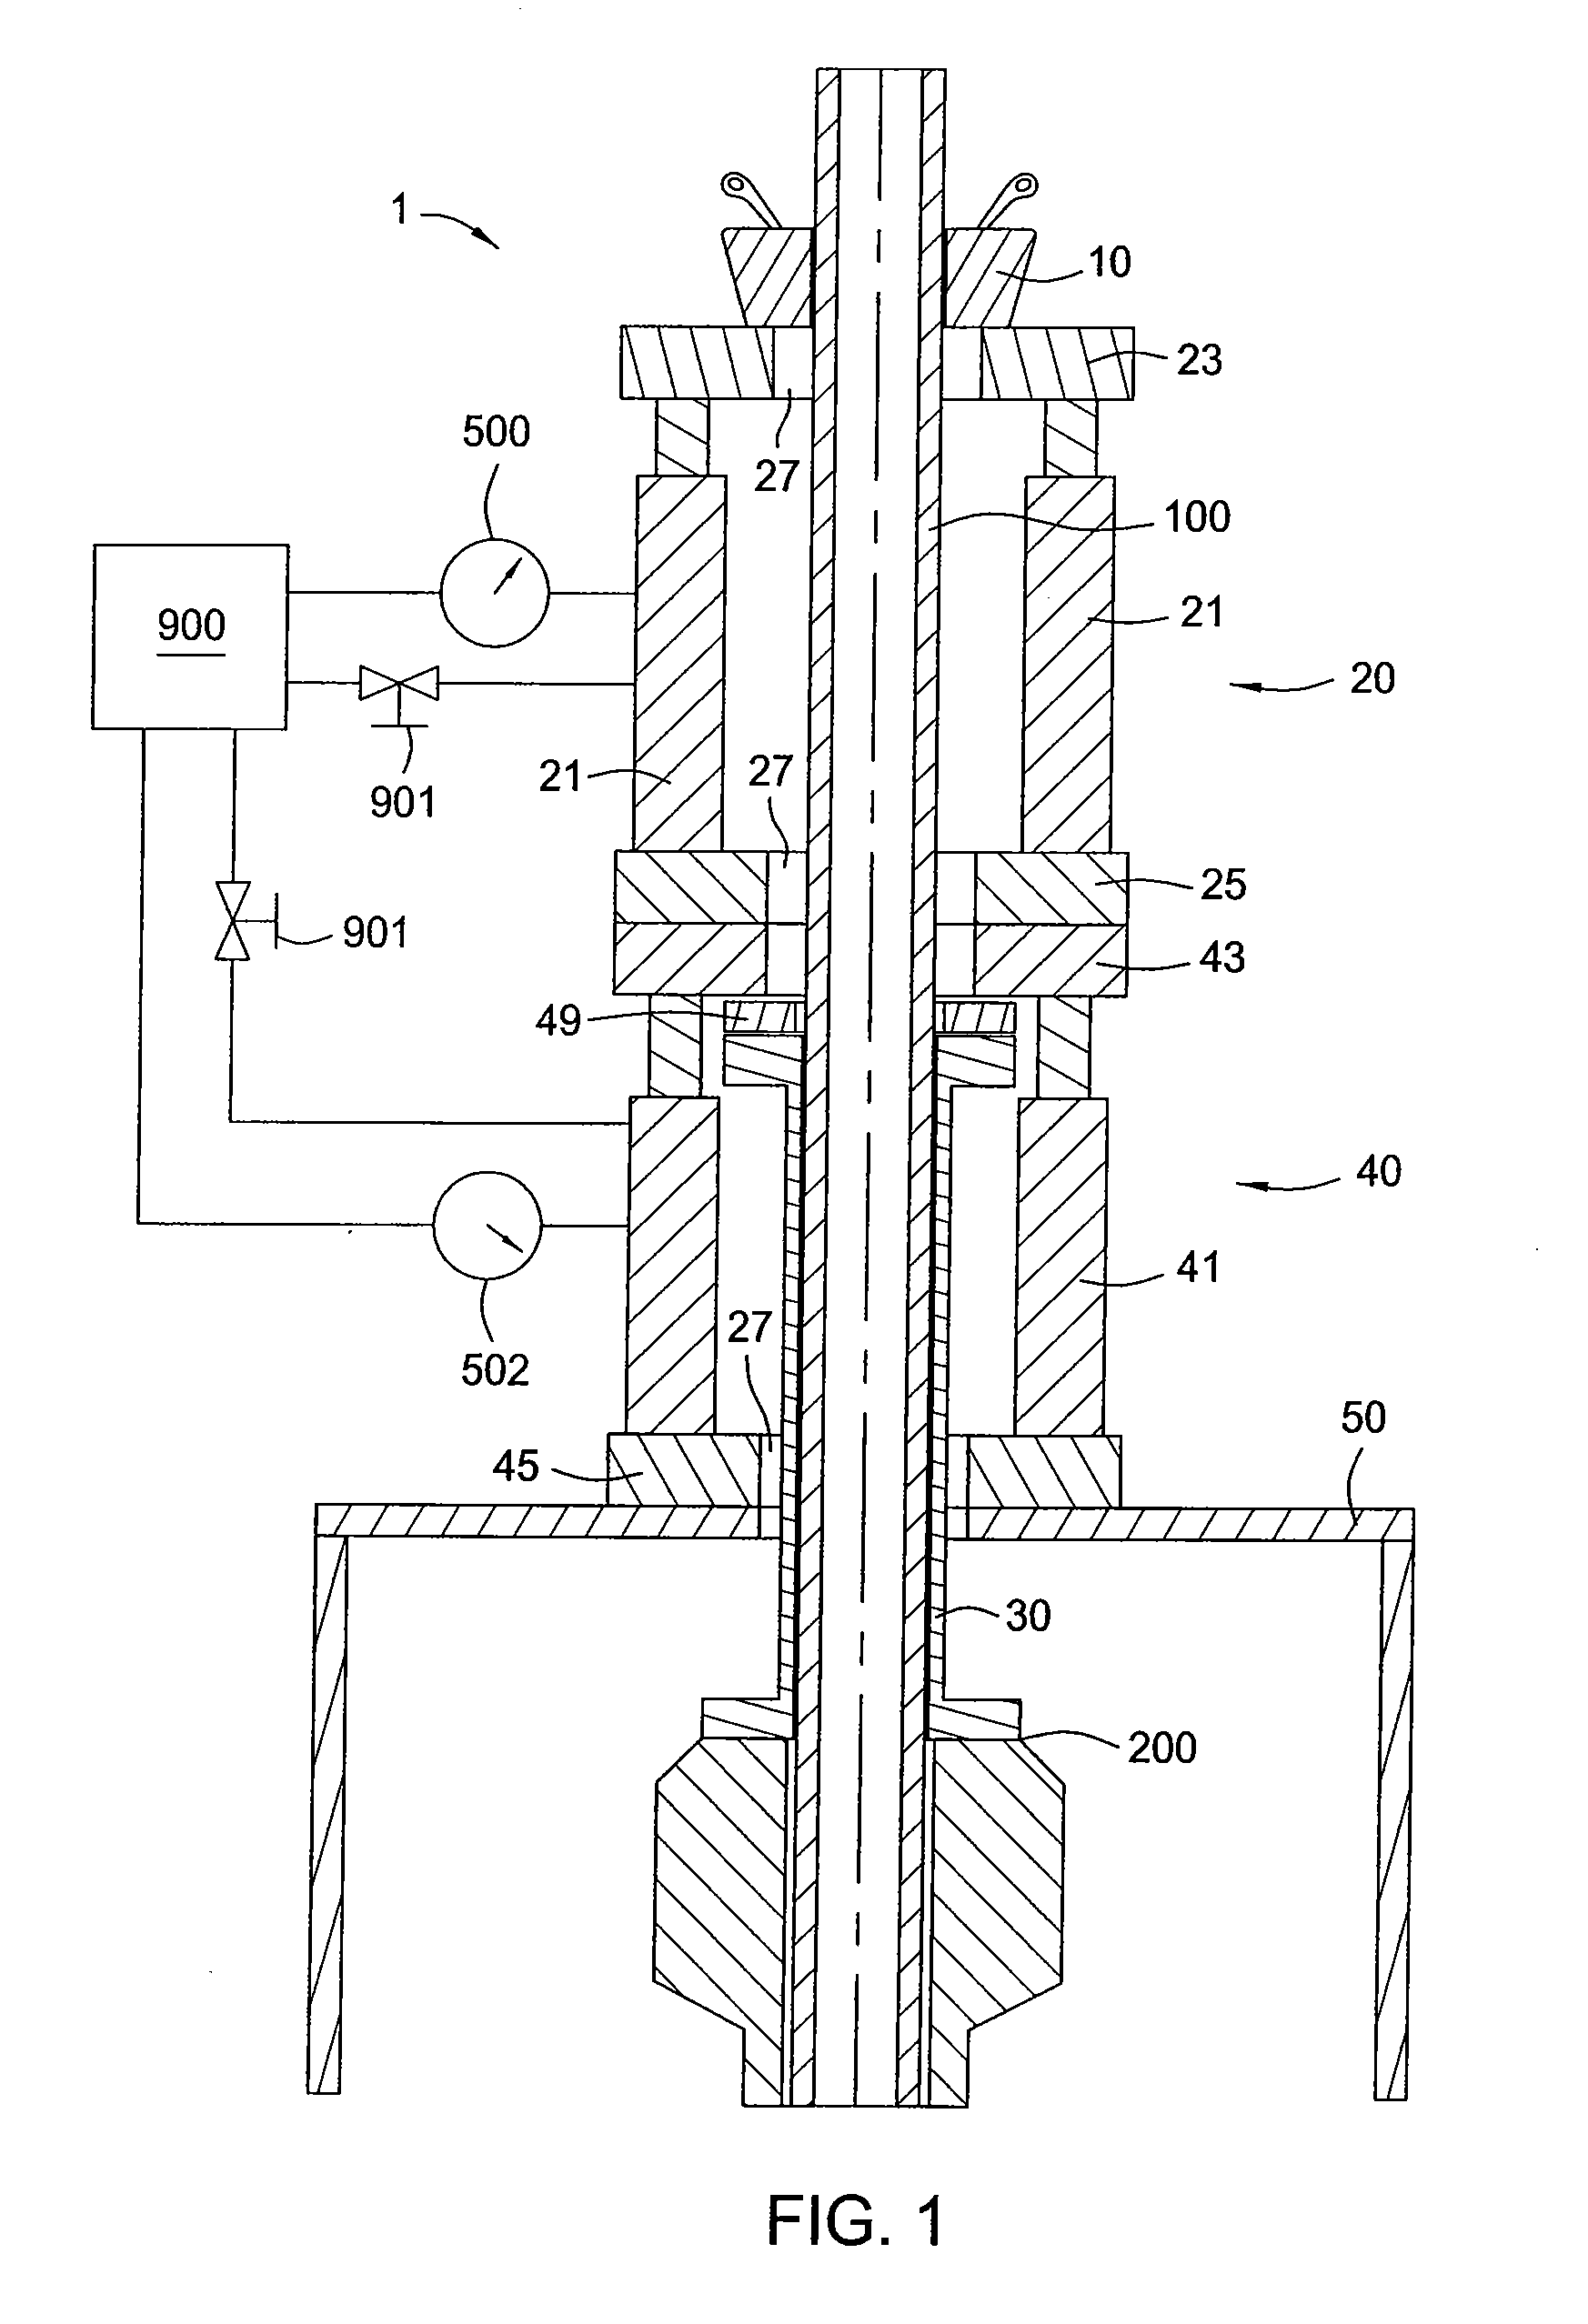 Controlled shared load casing jack system